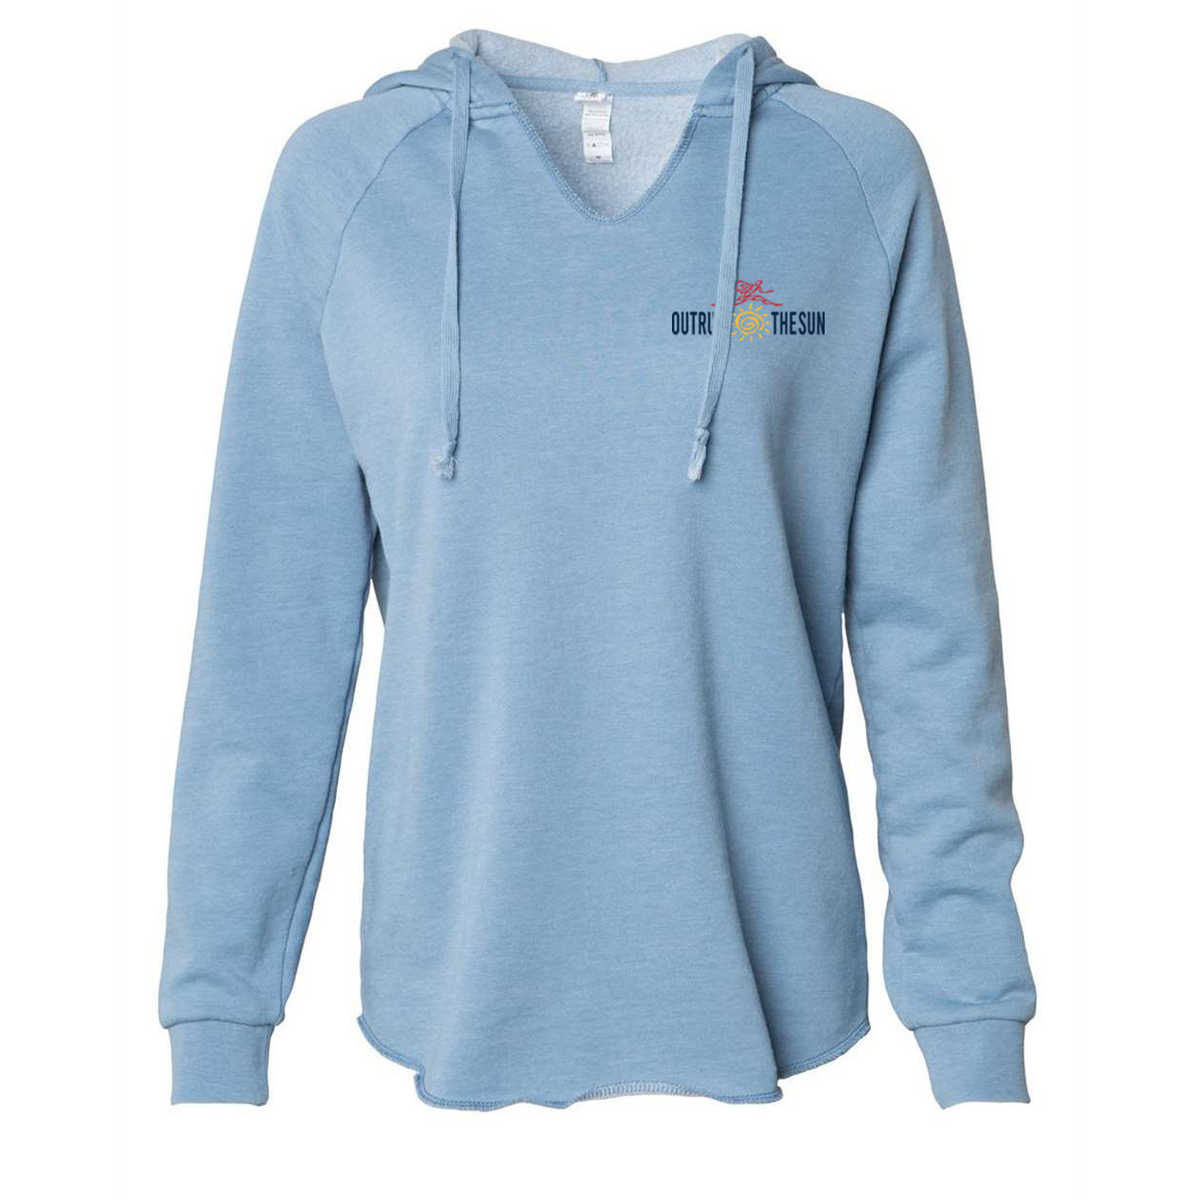 Outrun the Sun Independent Trading Co. Women’s Lightweight California Wave Wash Hooded Sweatshirt